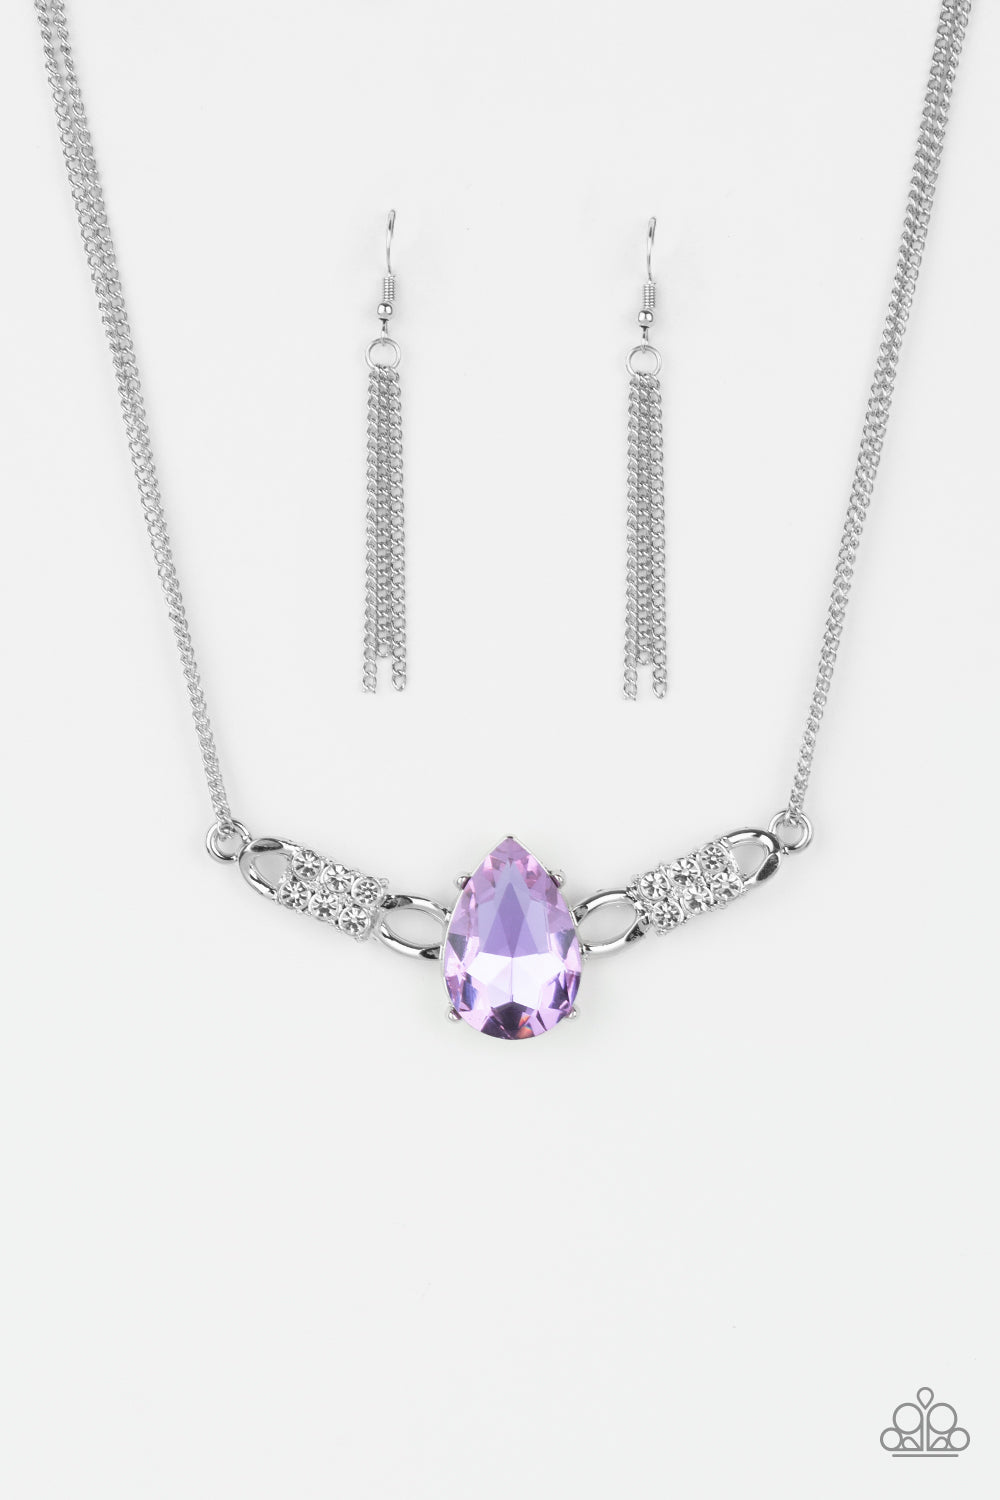 Way To Make An Entrance - Purple Necklace